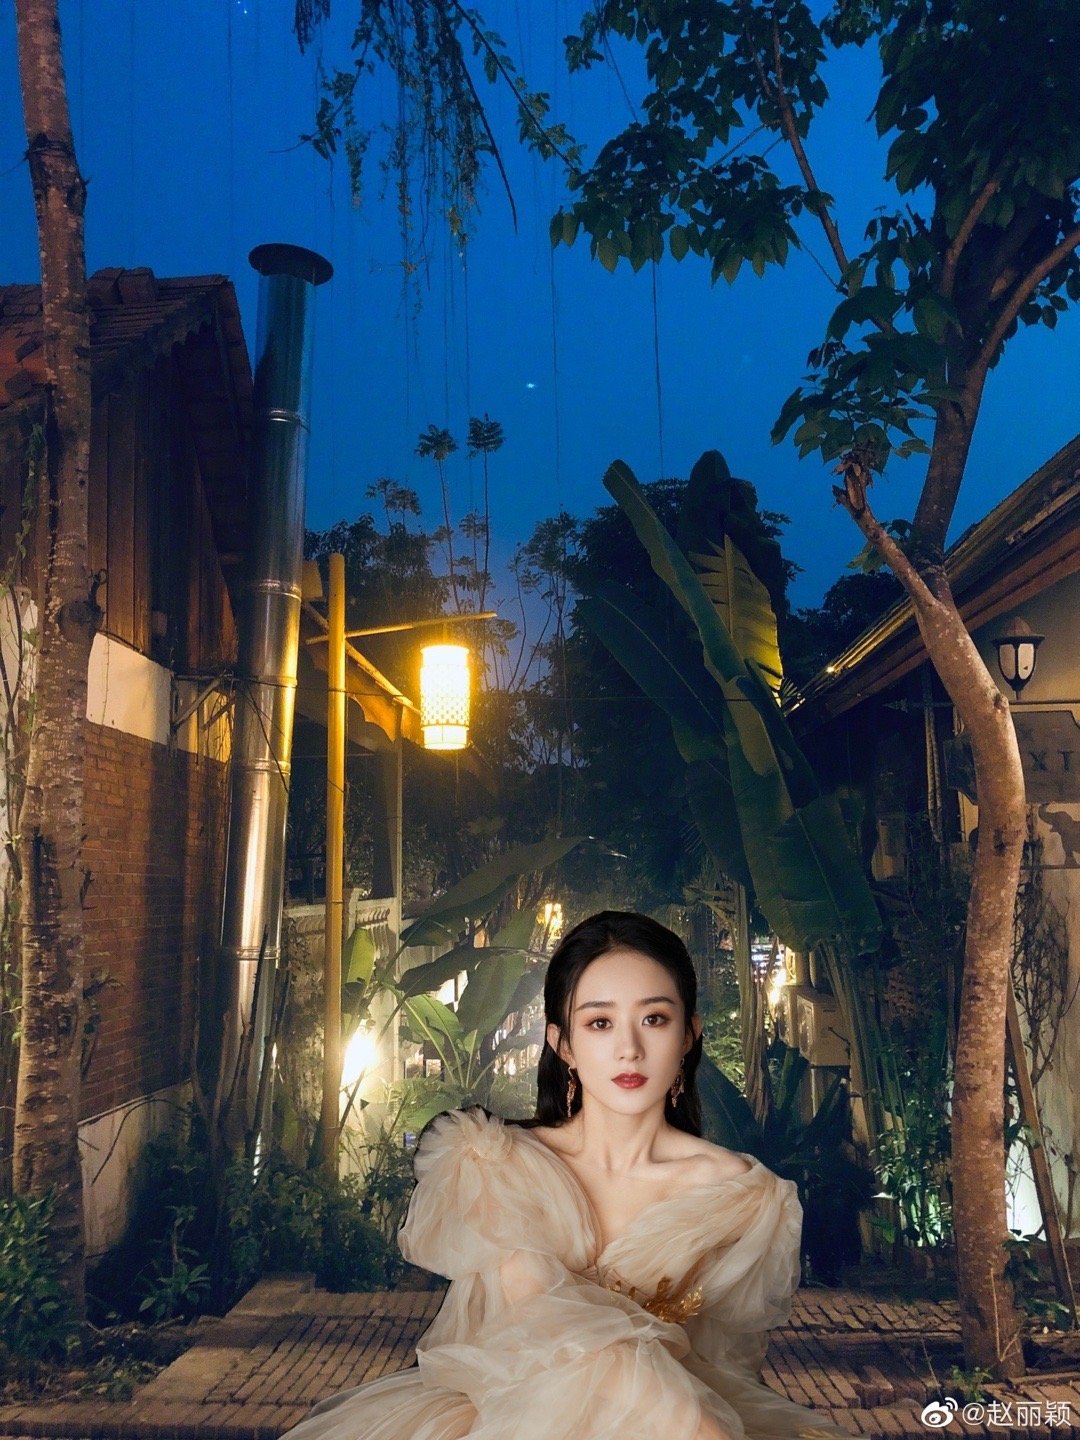 Zhao Liying is basked in " oneself are patted " after the photograph, vermicelli made from bean starch is initiative P graph contest, whose P to see best? 